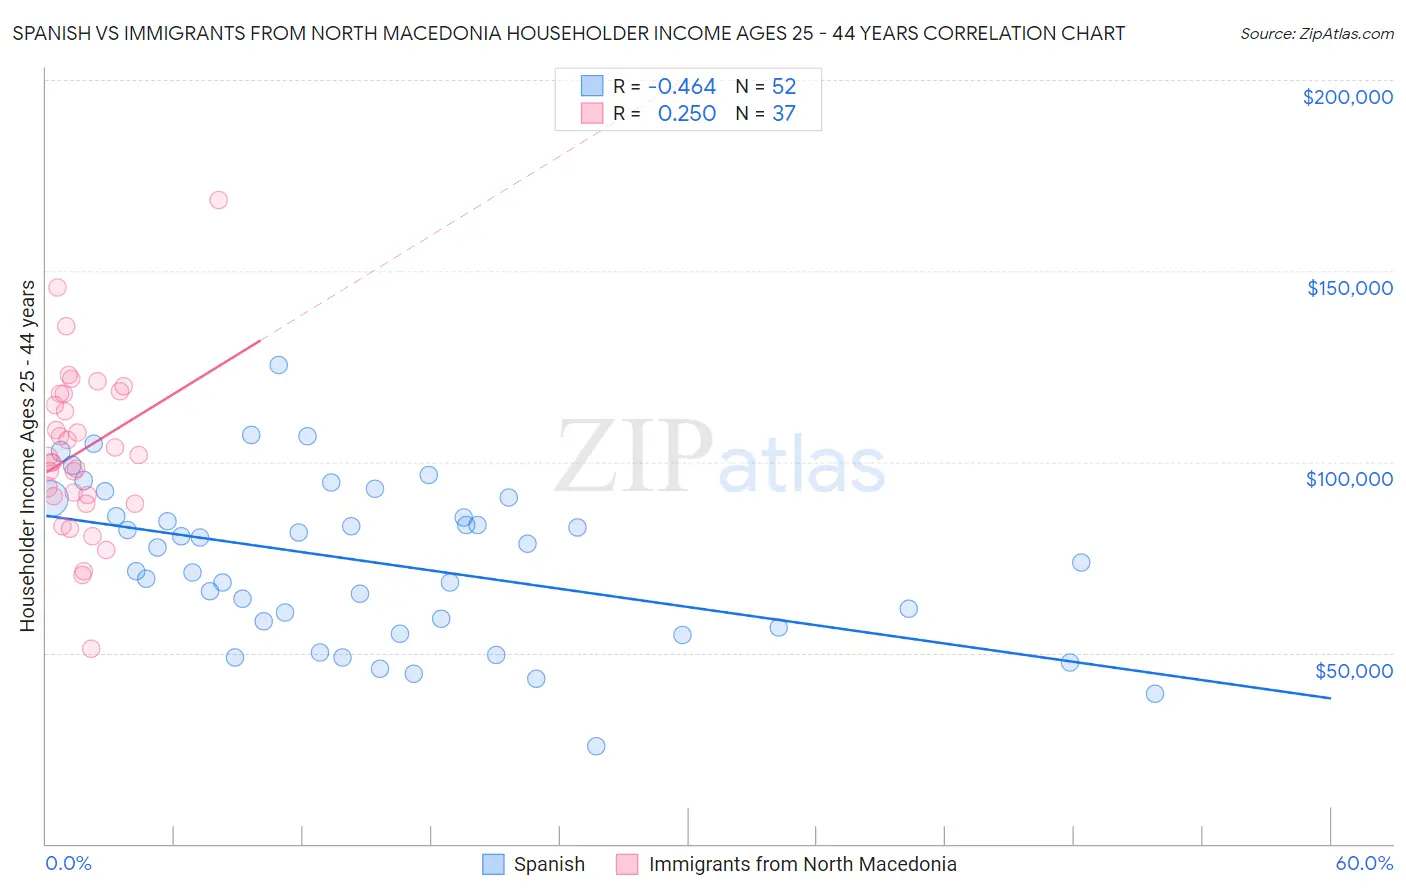 Spanish vs Immigrants from North Macedonia Householder Income Ages 25 - 44 years